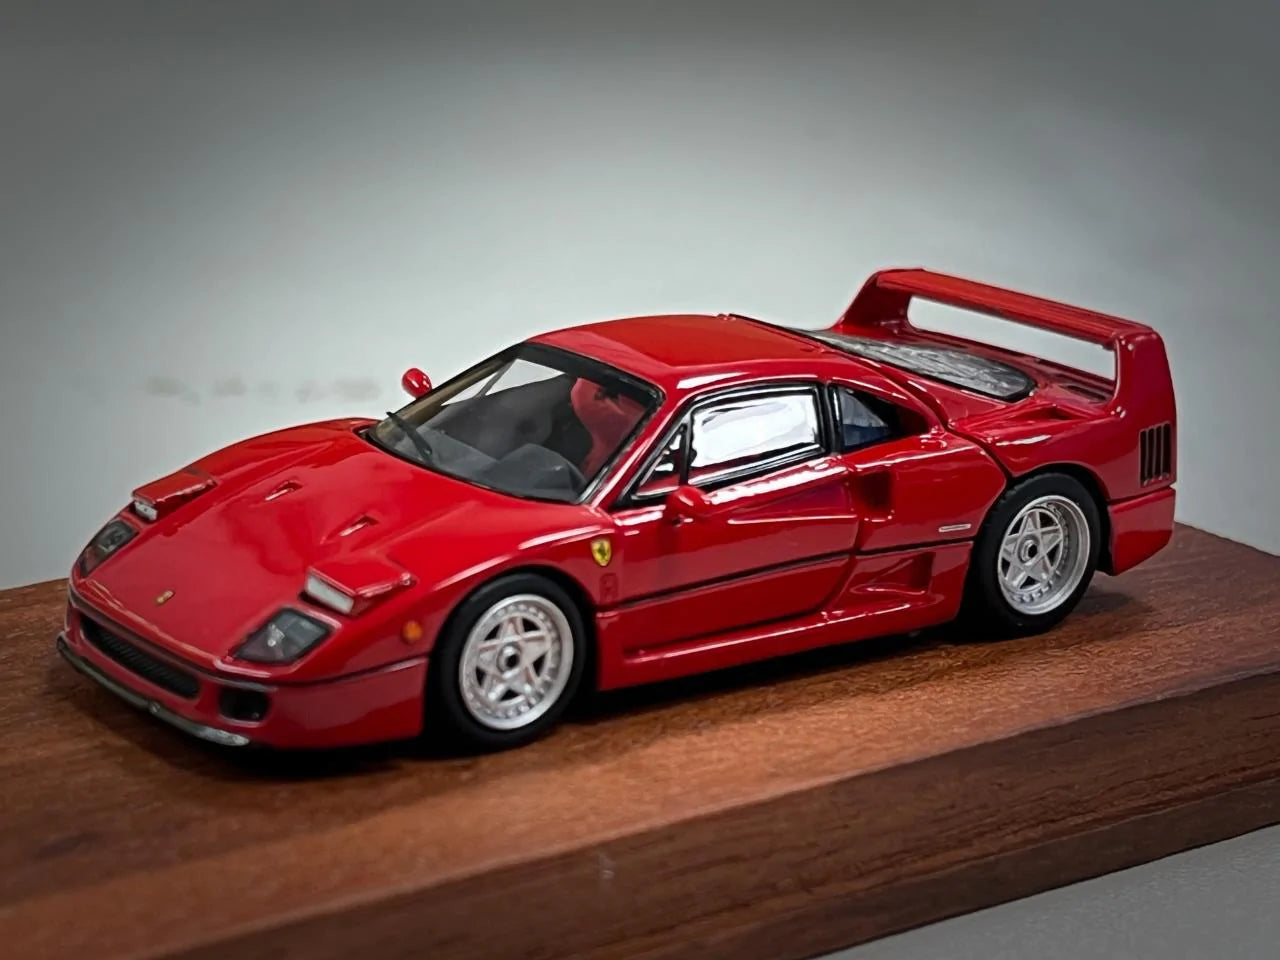 PGM 1:64 Ferrari F40 Red With Fully Opening Compartments